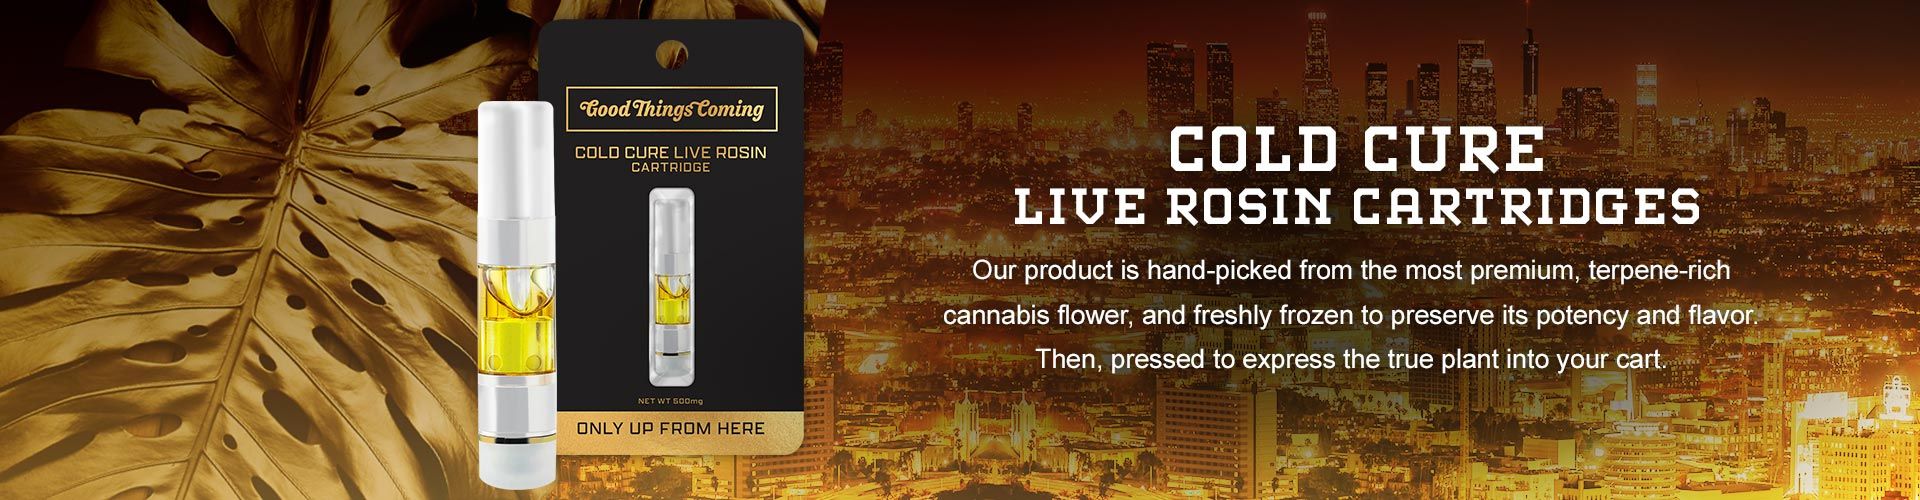 Cold Cure Live Rosin Cartridges